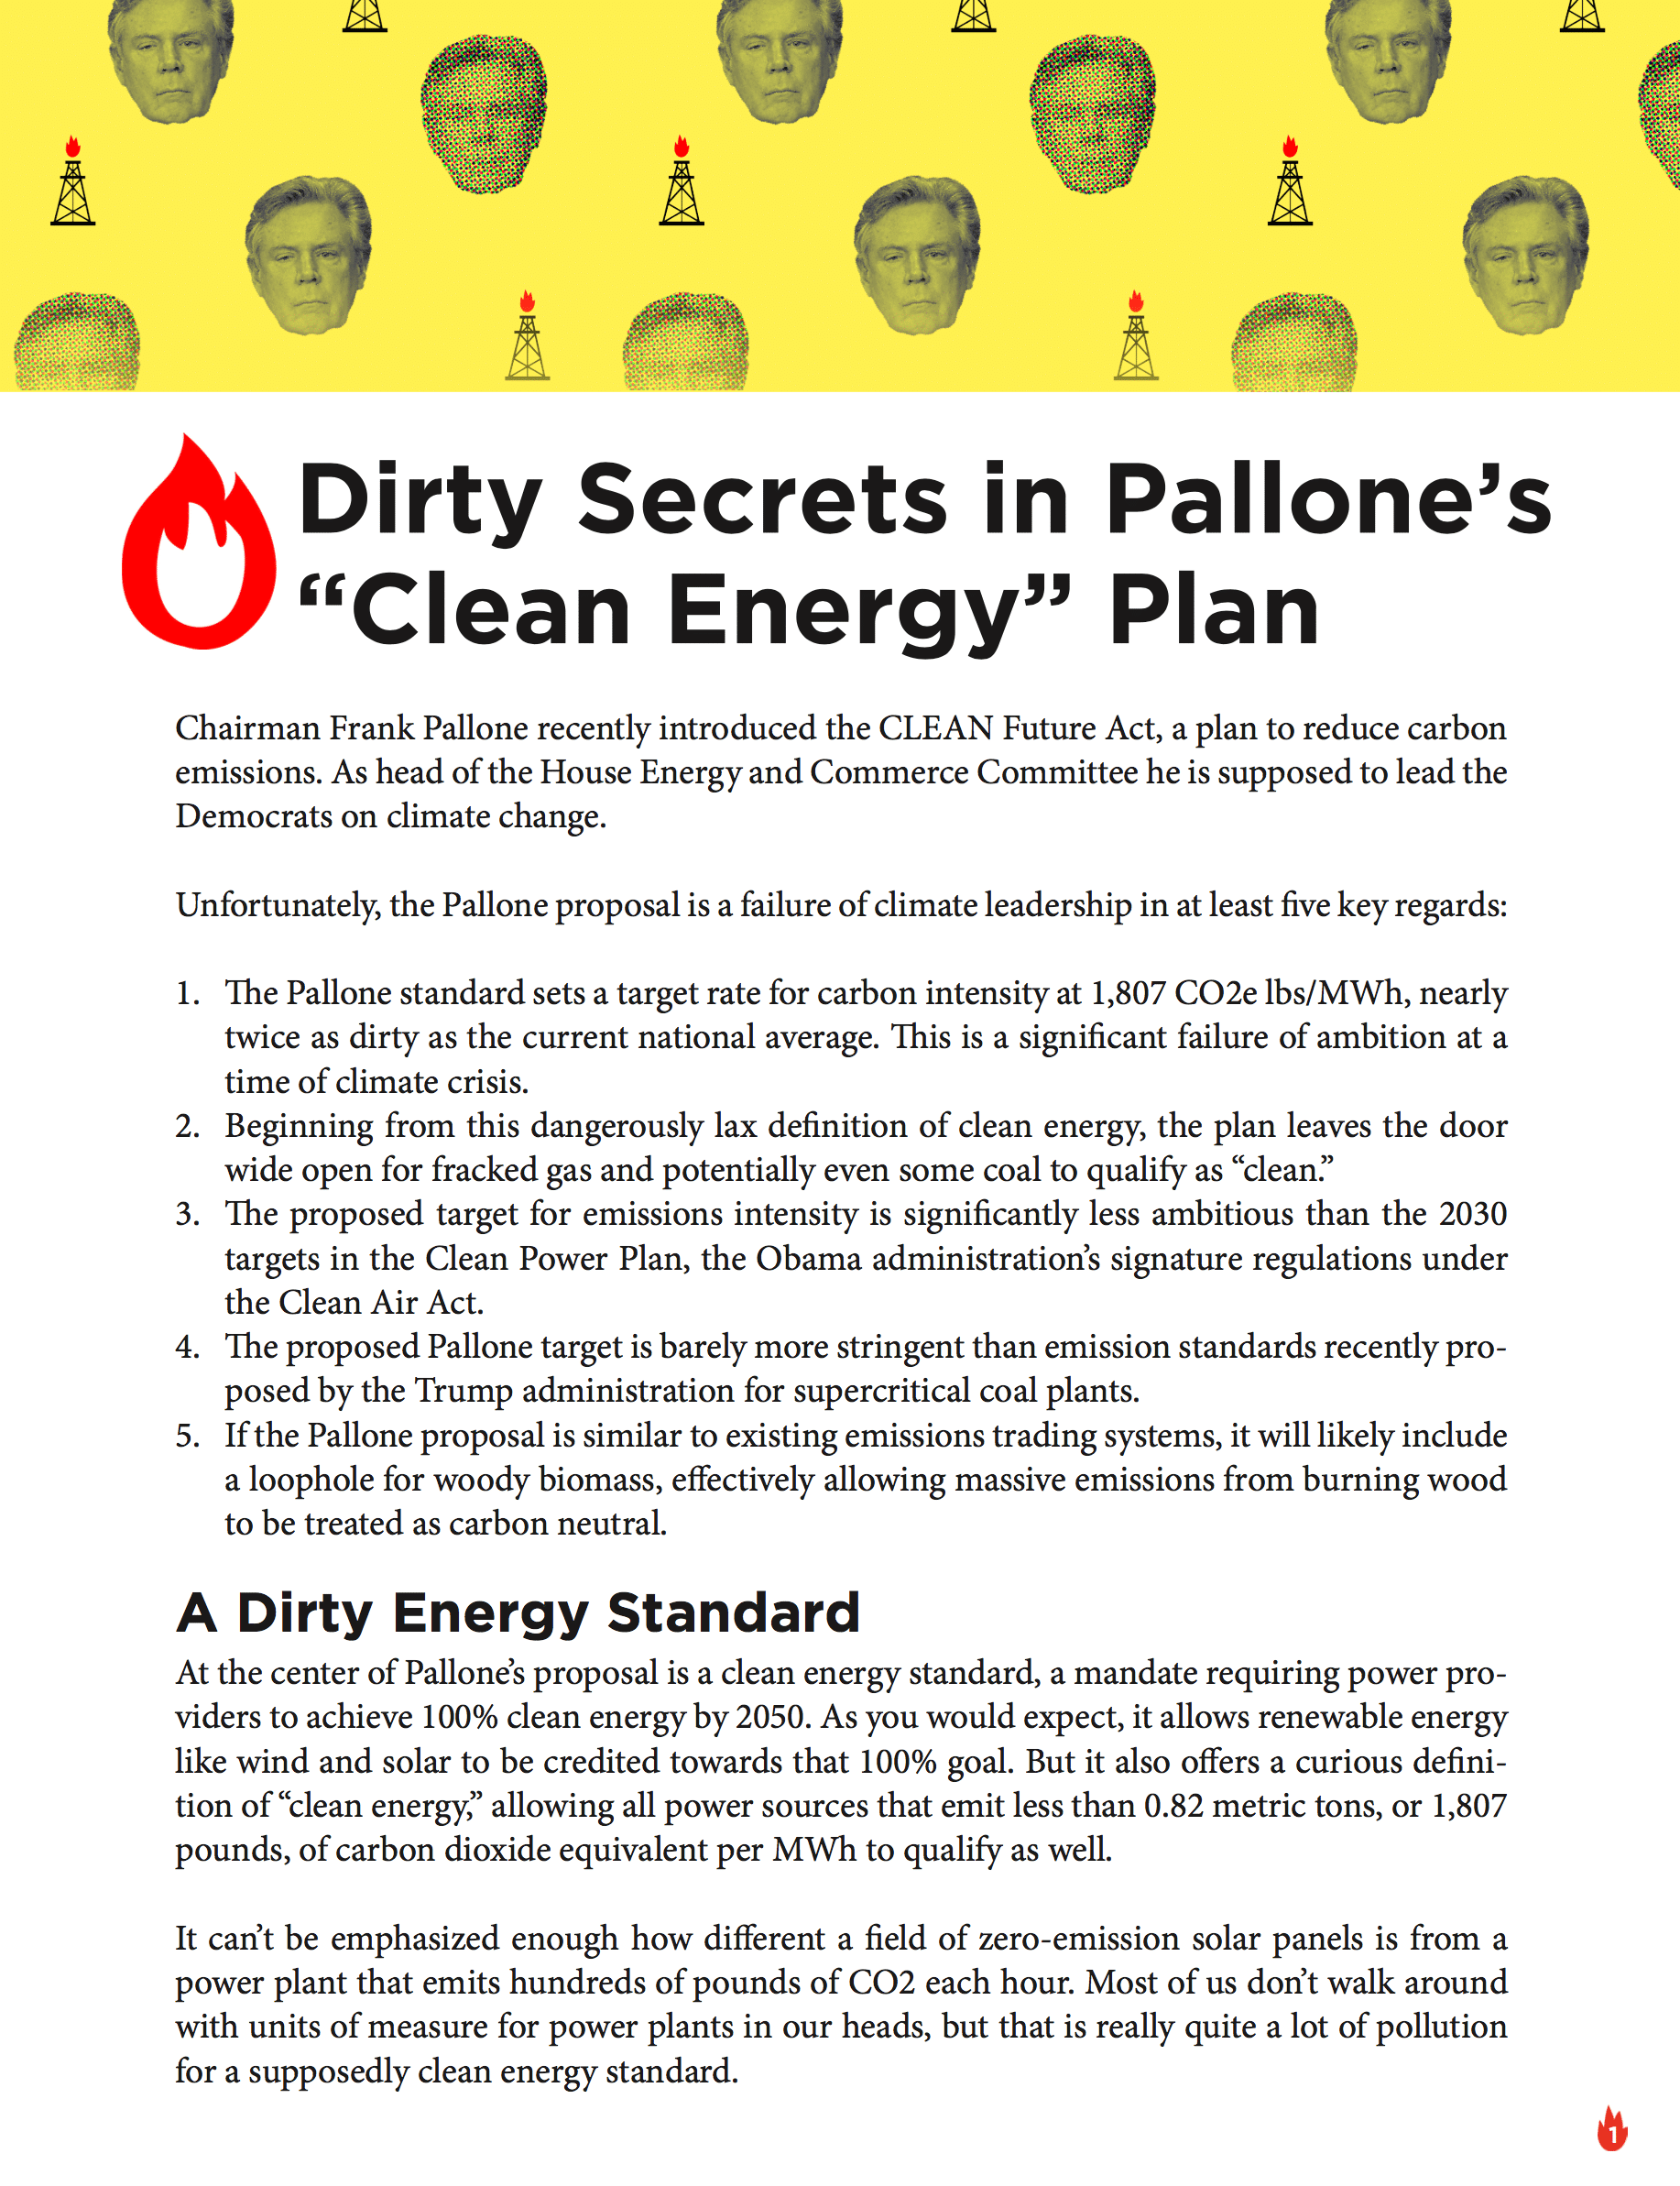 Dirty Secrets in Pallone’s “Clean Energy” Plan